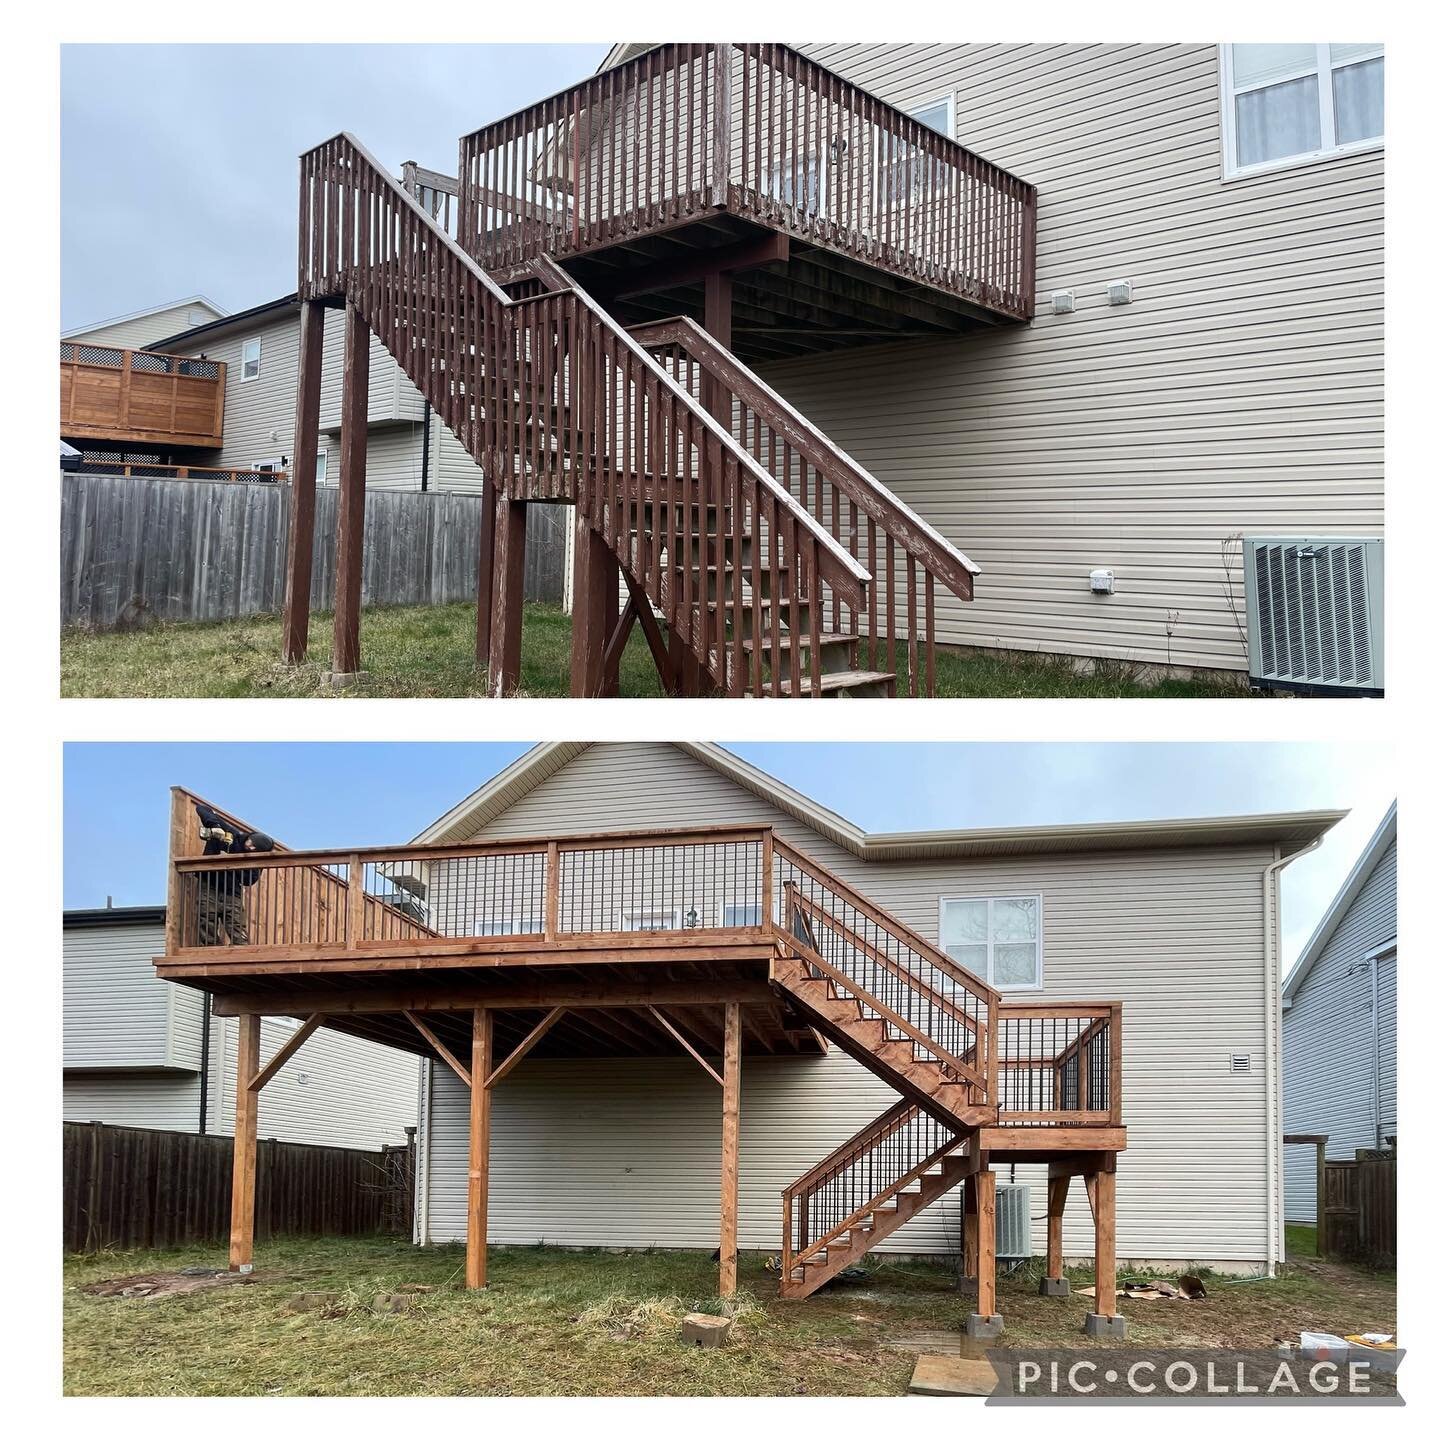 What a difference in this back yard! Remember your deck can become an extension of your living space, make the most of it! 
#blueridgebuilders #beforeandafter #wooddeck #transformation #halifaxcontractor